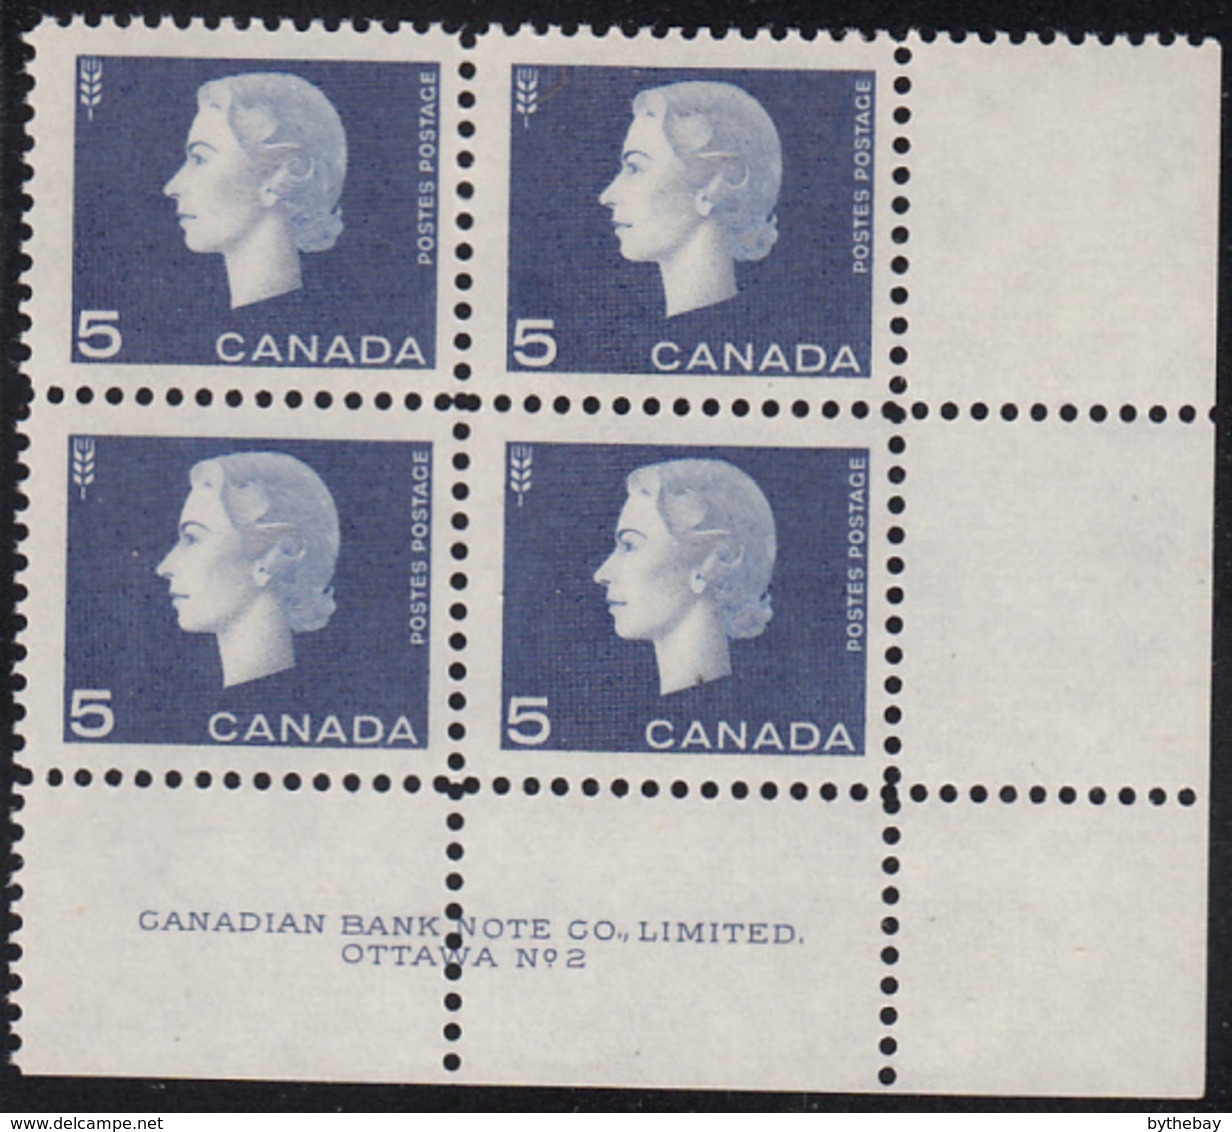 Canada 1962 MNH Sc #405 5c QEII Cameo Plate #2 LR - Plate Number & Inscriptions